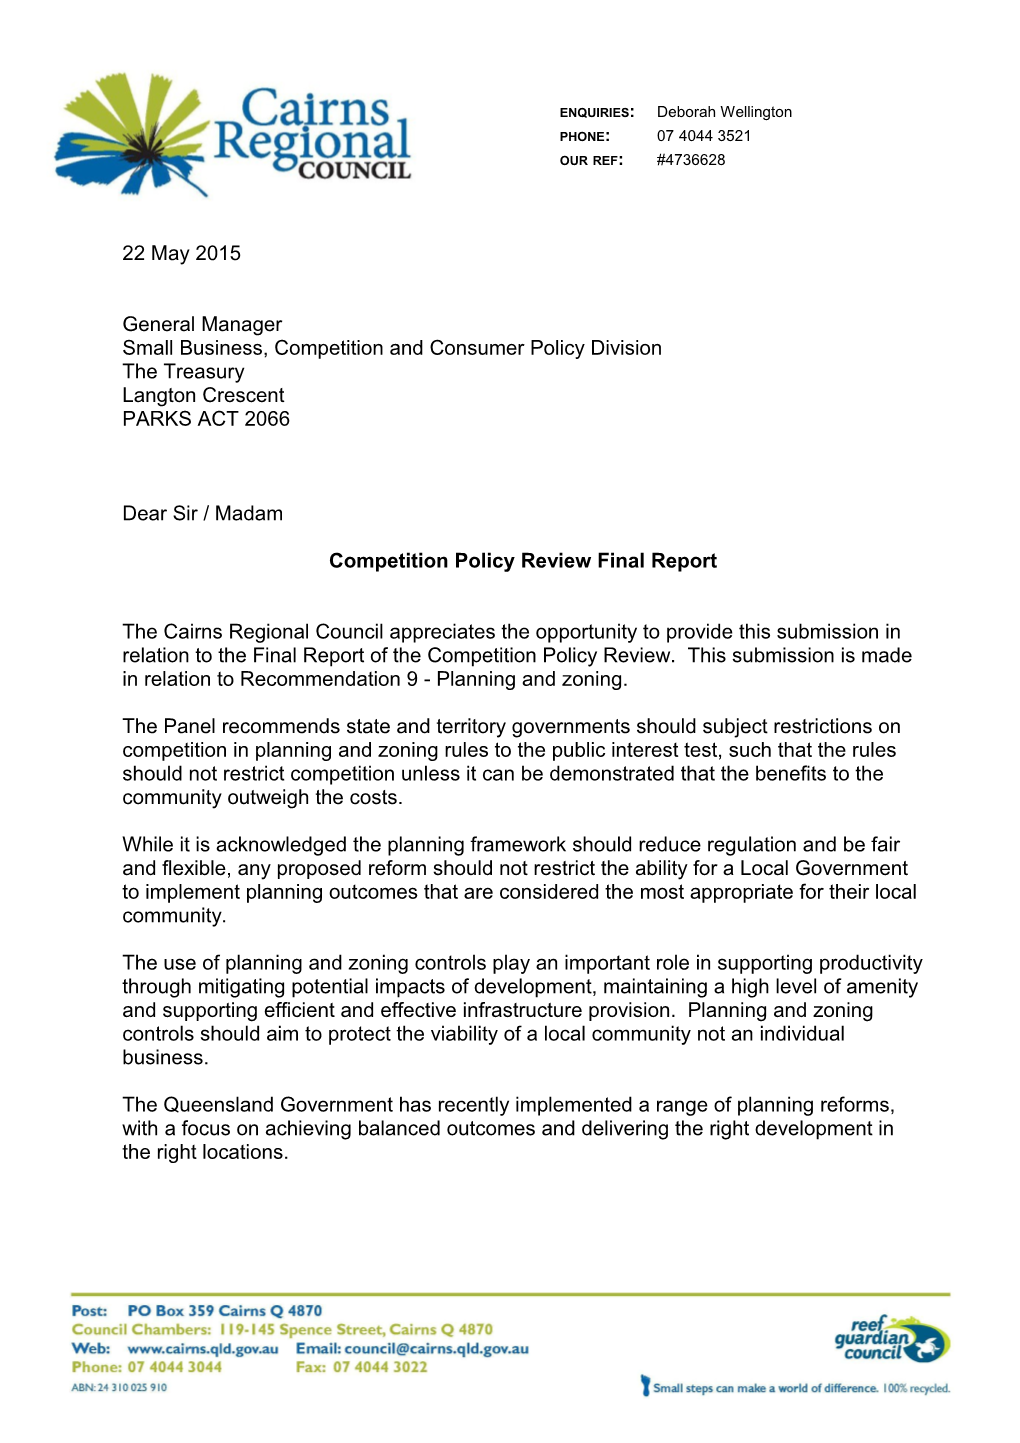 Cairns Regional Council - Competition Policy Review Final Report